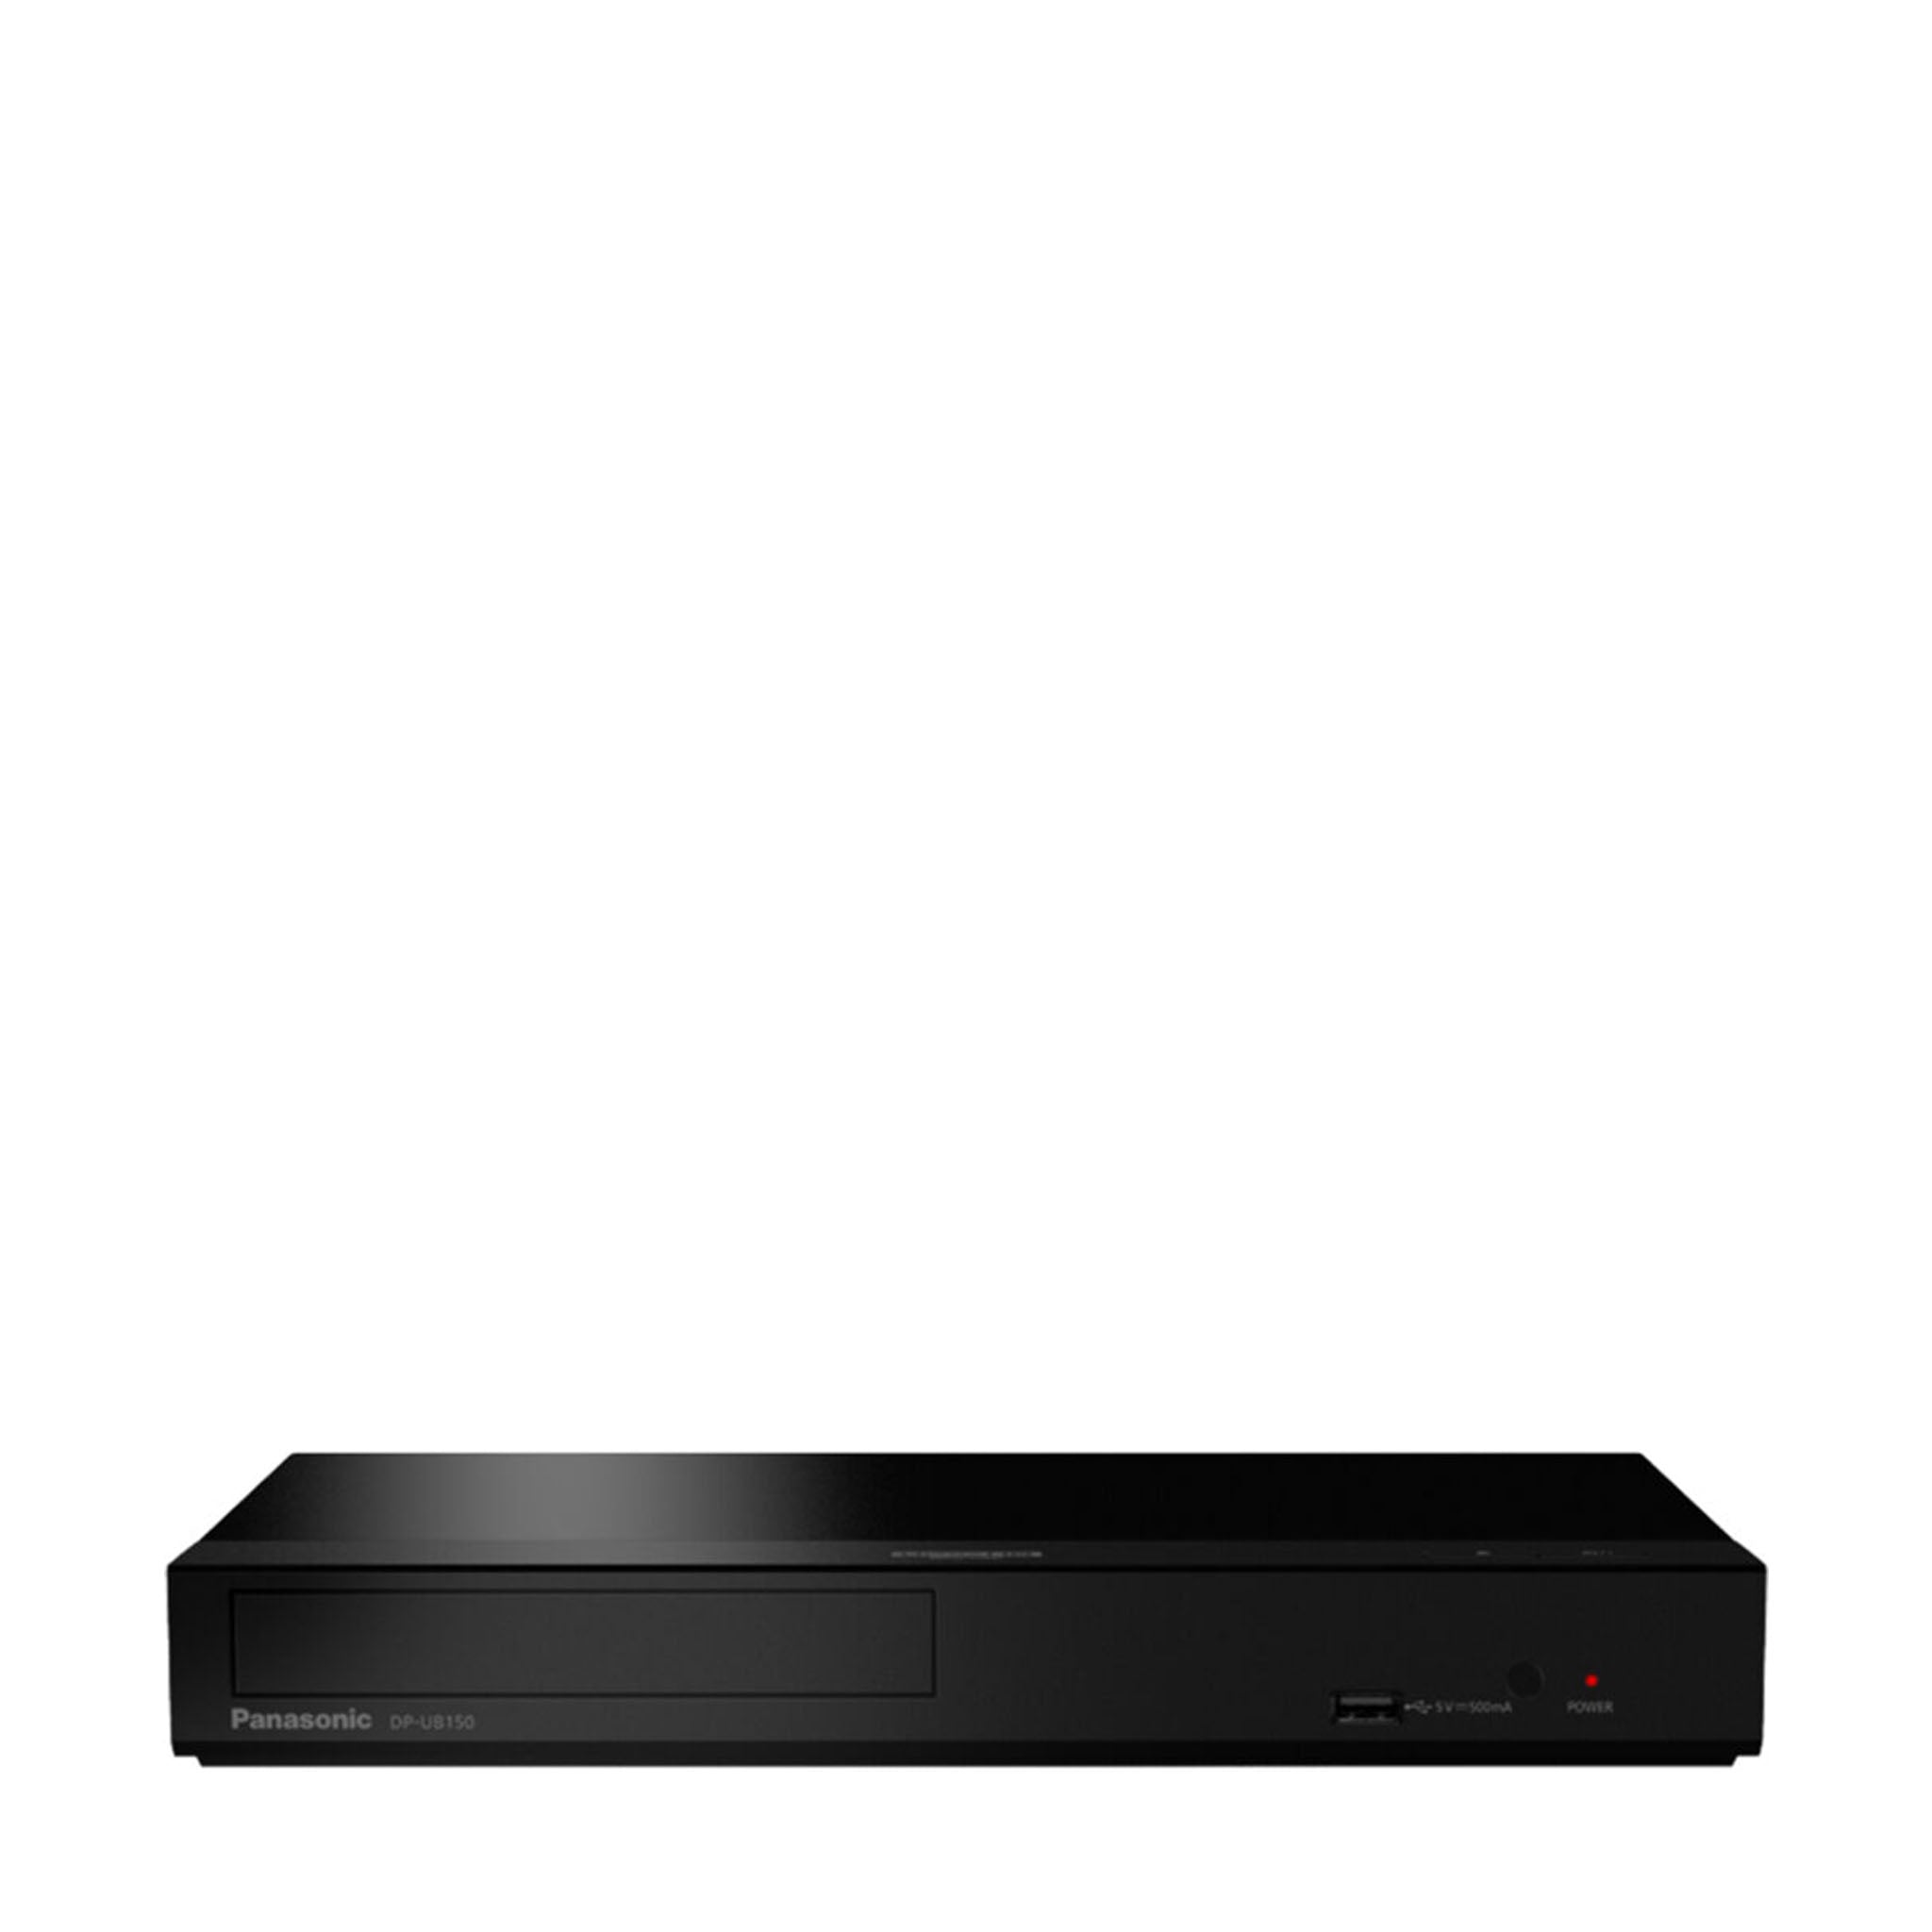 Panasonic 4K Streaming Blu-ray Player with Dobly Vision 7.1, Ultra 